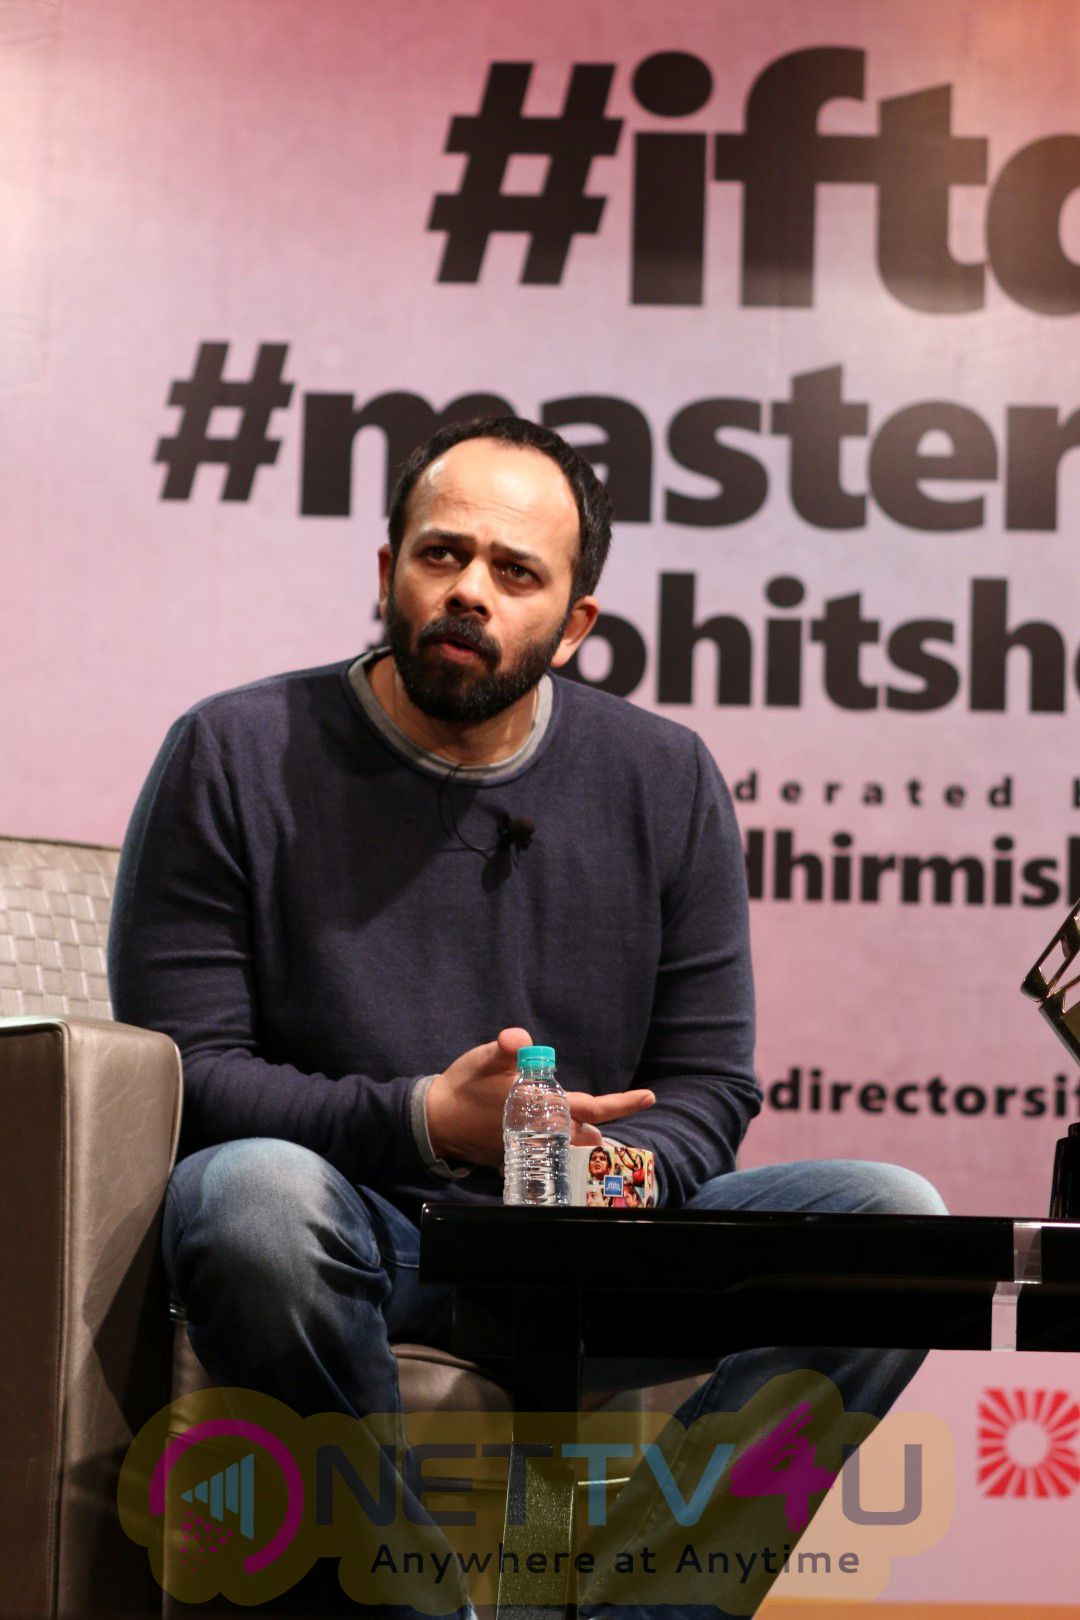 Master Class Session By Rohit Shetty & Sudhir Mishra Stunning Photos Hindi Gallery